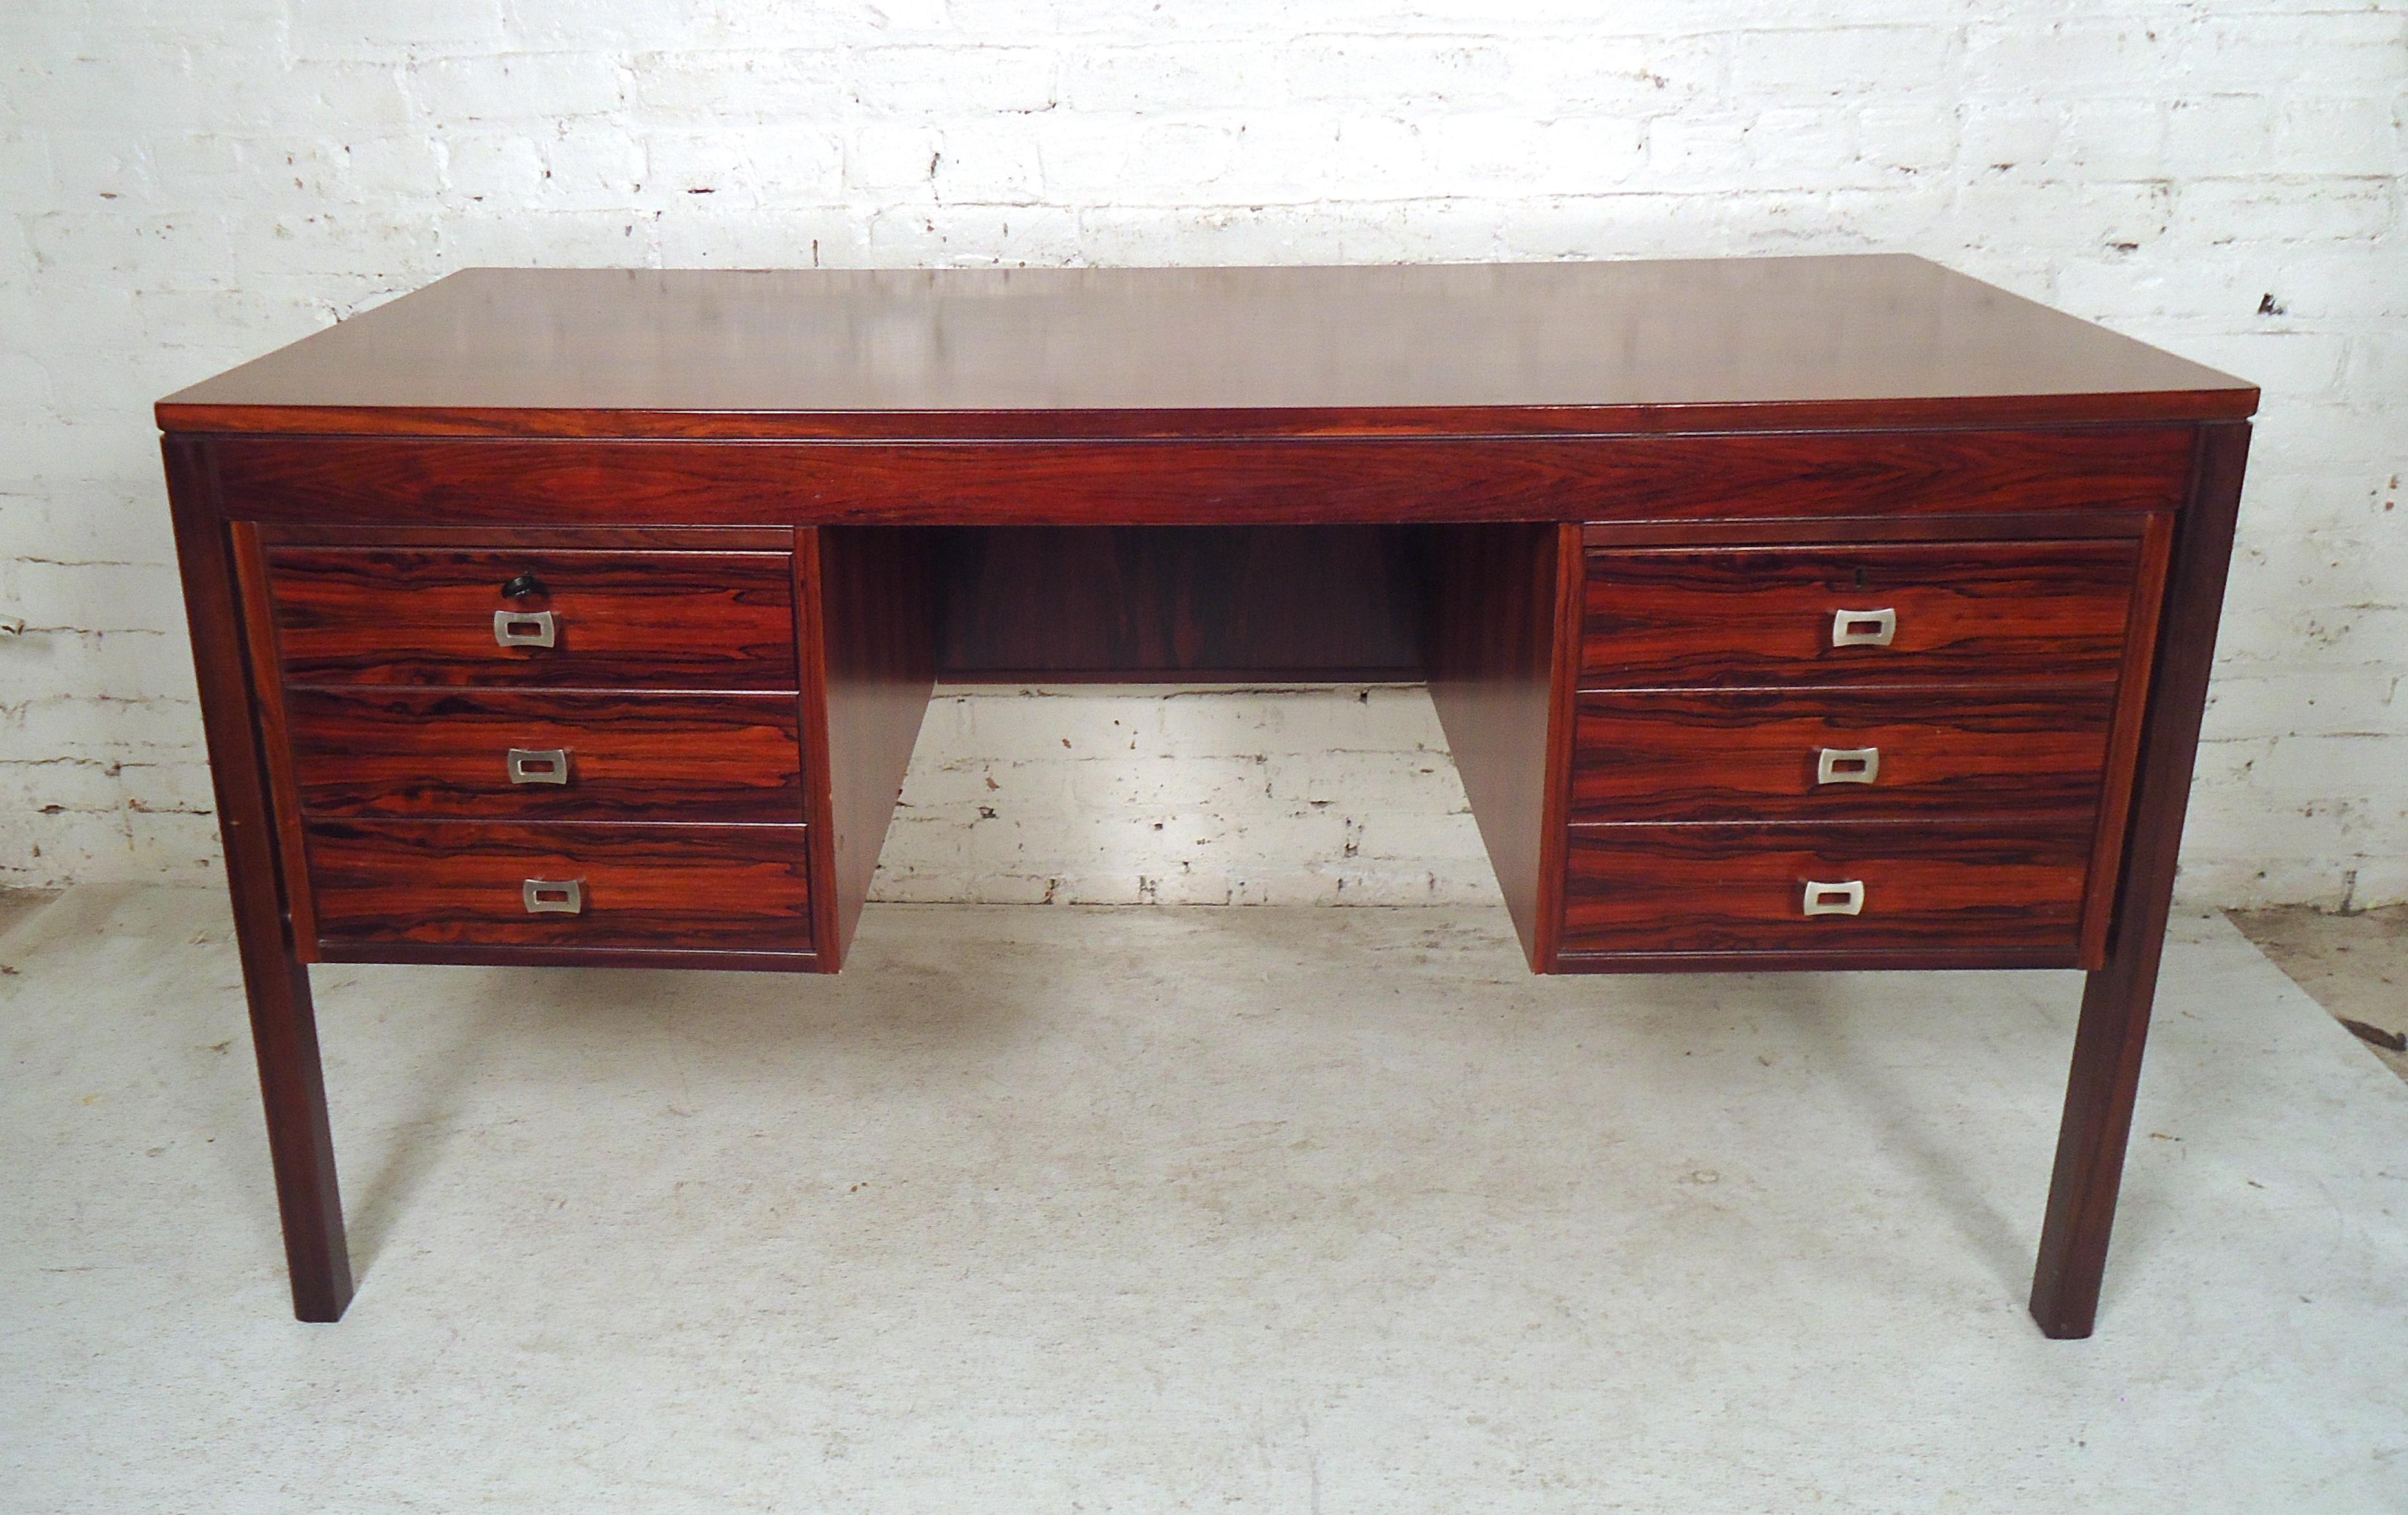 This fantastic midcentury desk features a beautiful Rosewood finish, and sturdy frame. Unique chrome drawer pulls add to the modern style of the piece, while the ample drawer space is perfect for organization. Please confirm item location (NY or NJ).